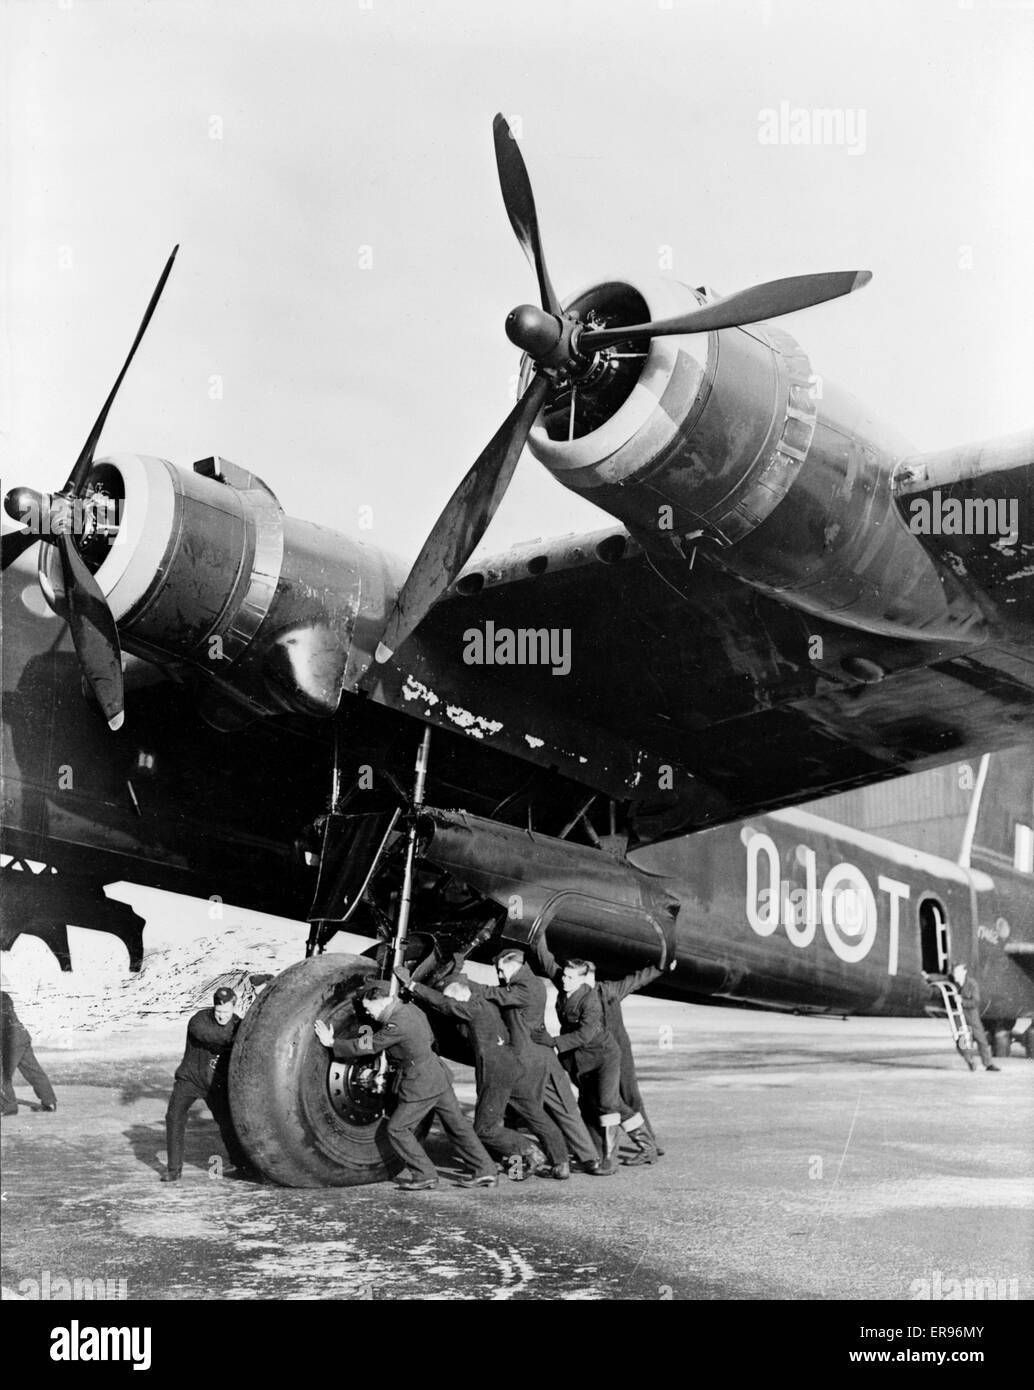 SHORT STIRLING Mk 1 of 149 Squadron RAF at Mildenhall, Suffolk, in January 1942. Ground crew push OJ-T out of its hanger for servicing. Photo US Official Stock Photo